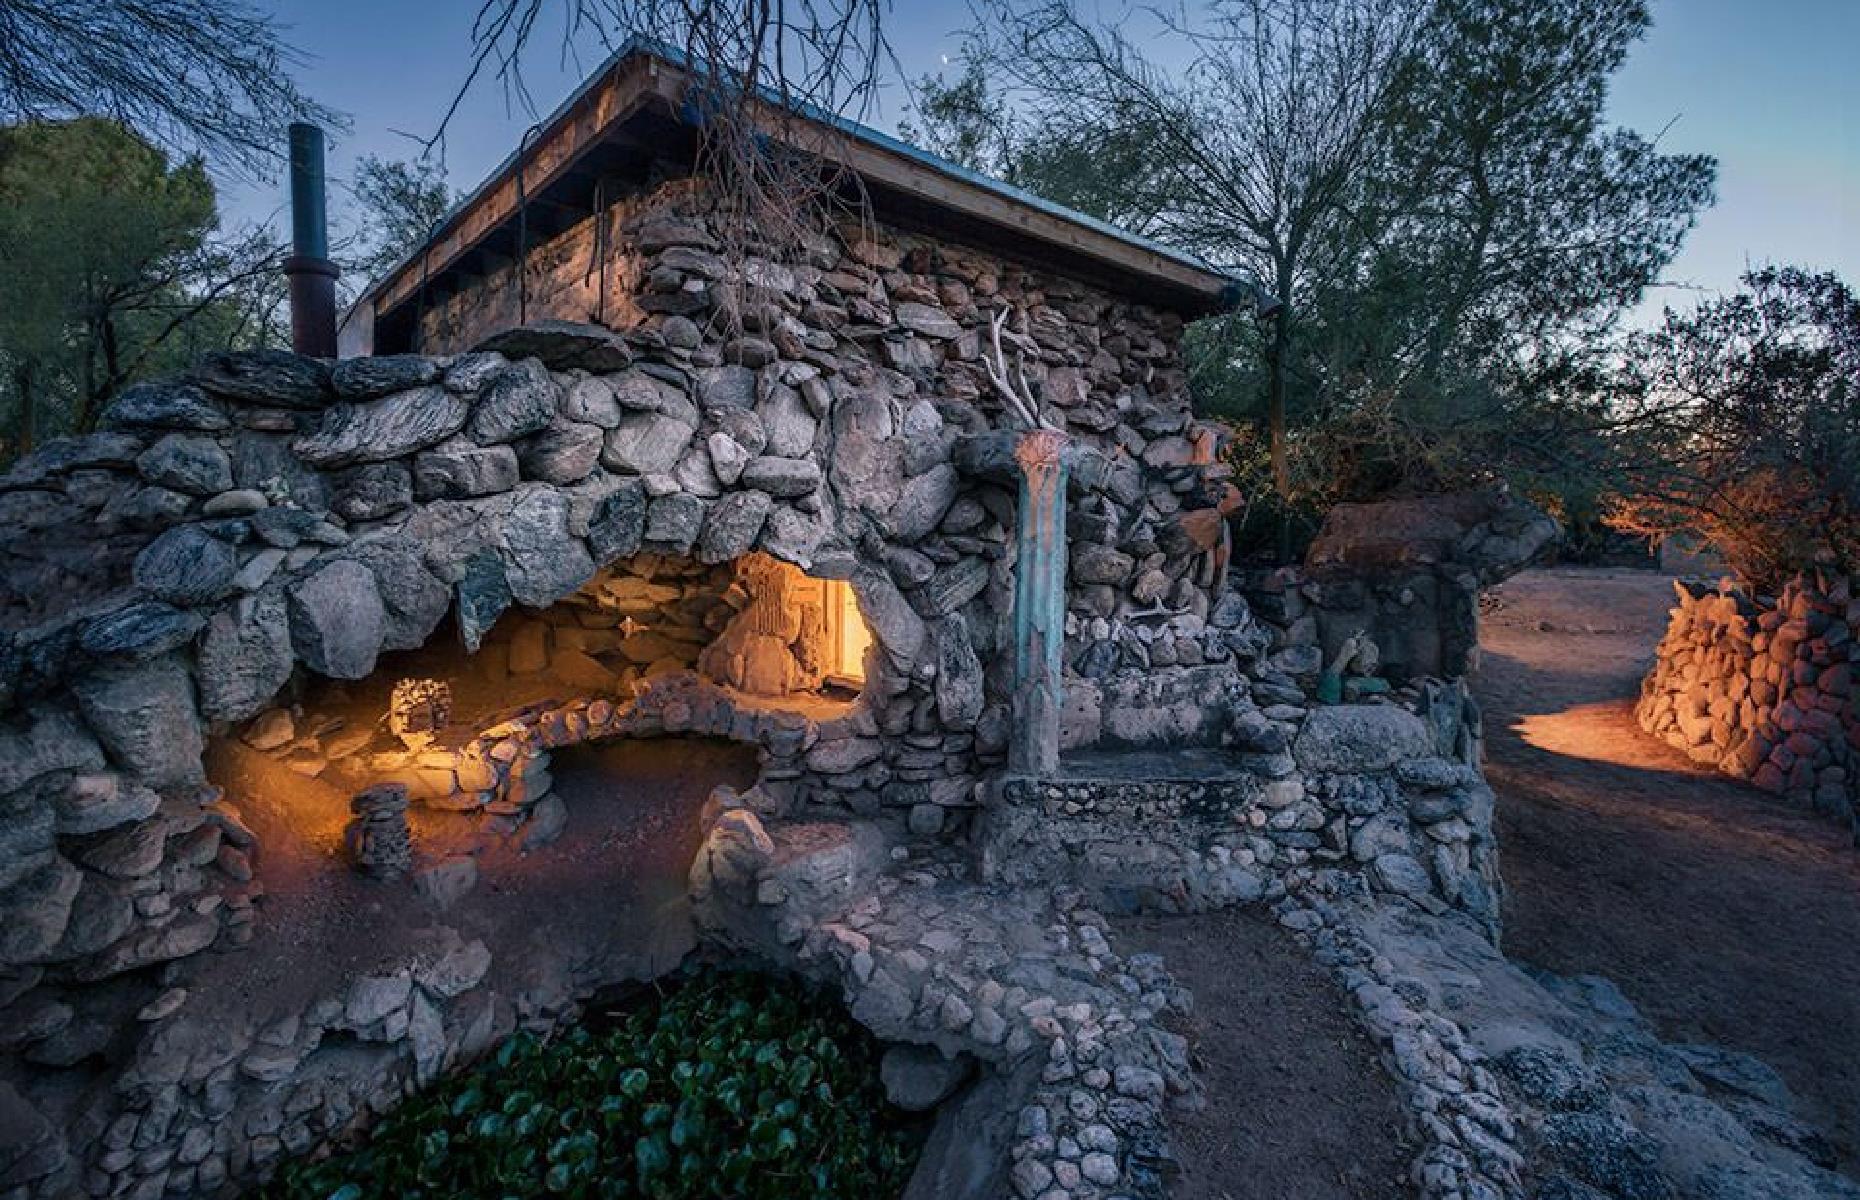 <p>This charming little “fantasy park” was created by George Phar Legler, who dreamed of building a Spiritualist-informed space to entertain children. A believer in fairies and other sprites, Legler began work on <a href="https://www.tucsonvalleyofthemoon.com/">Valley of the Moon</a> in 1923 and he lived on the property until his death in 1982. By that point a group of volunteers had already set to running and restoring the park as a non-profit and it continues to be open to visitors to this day.</p>